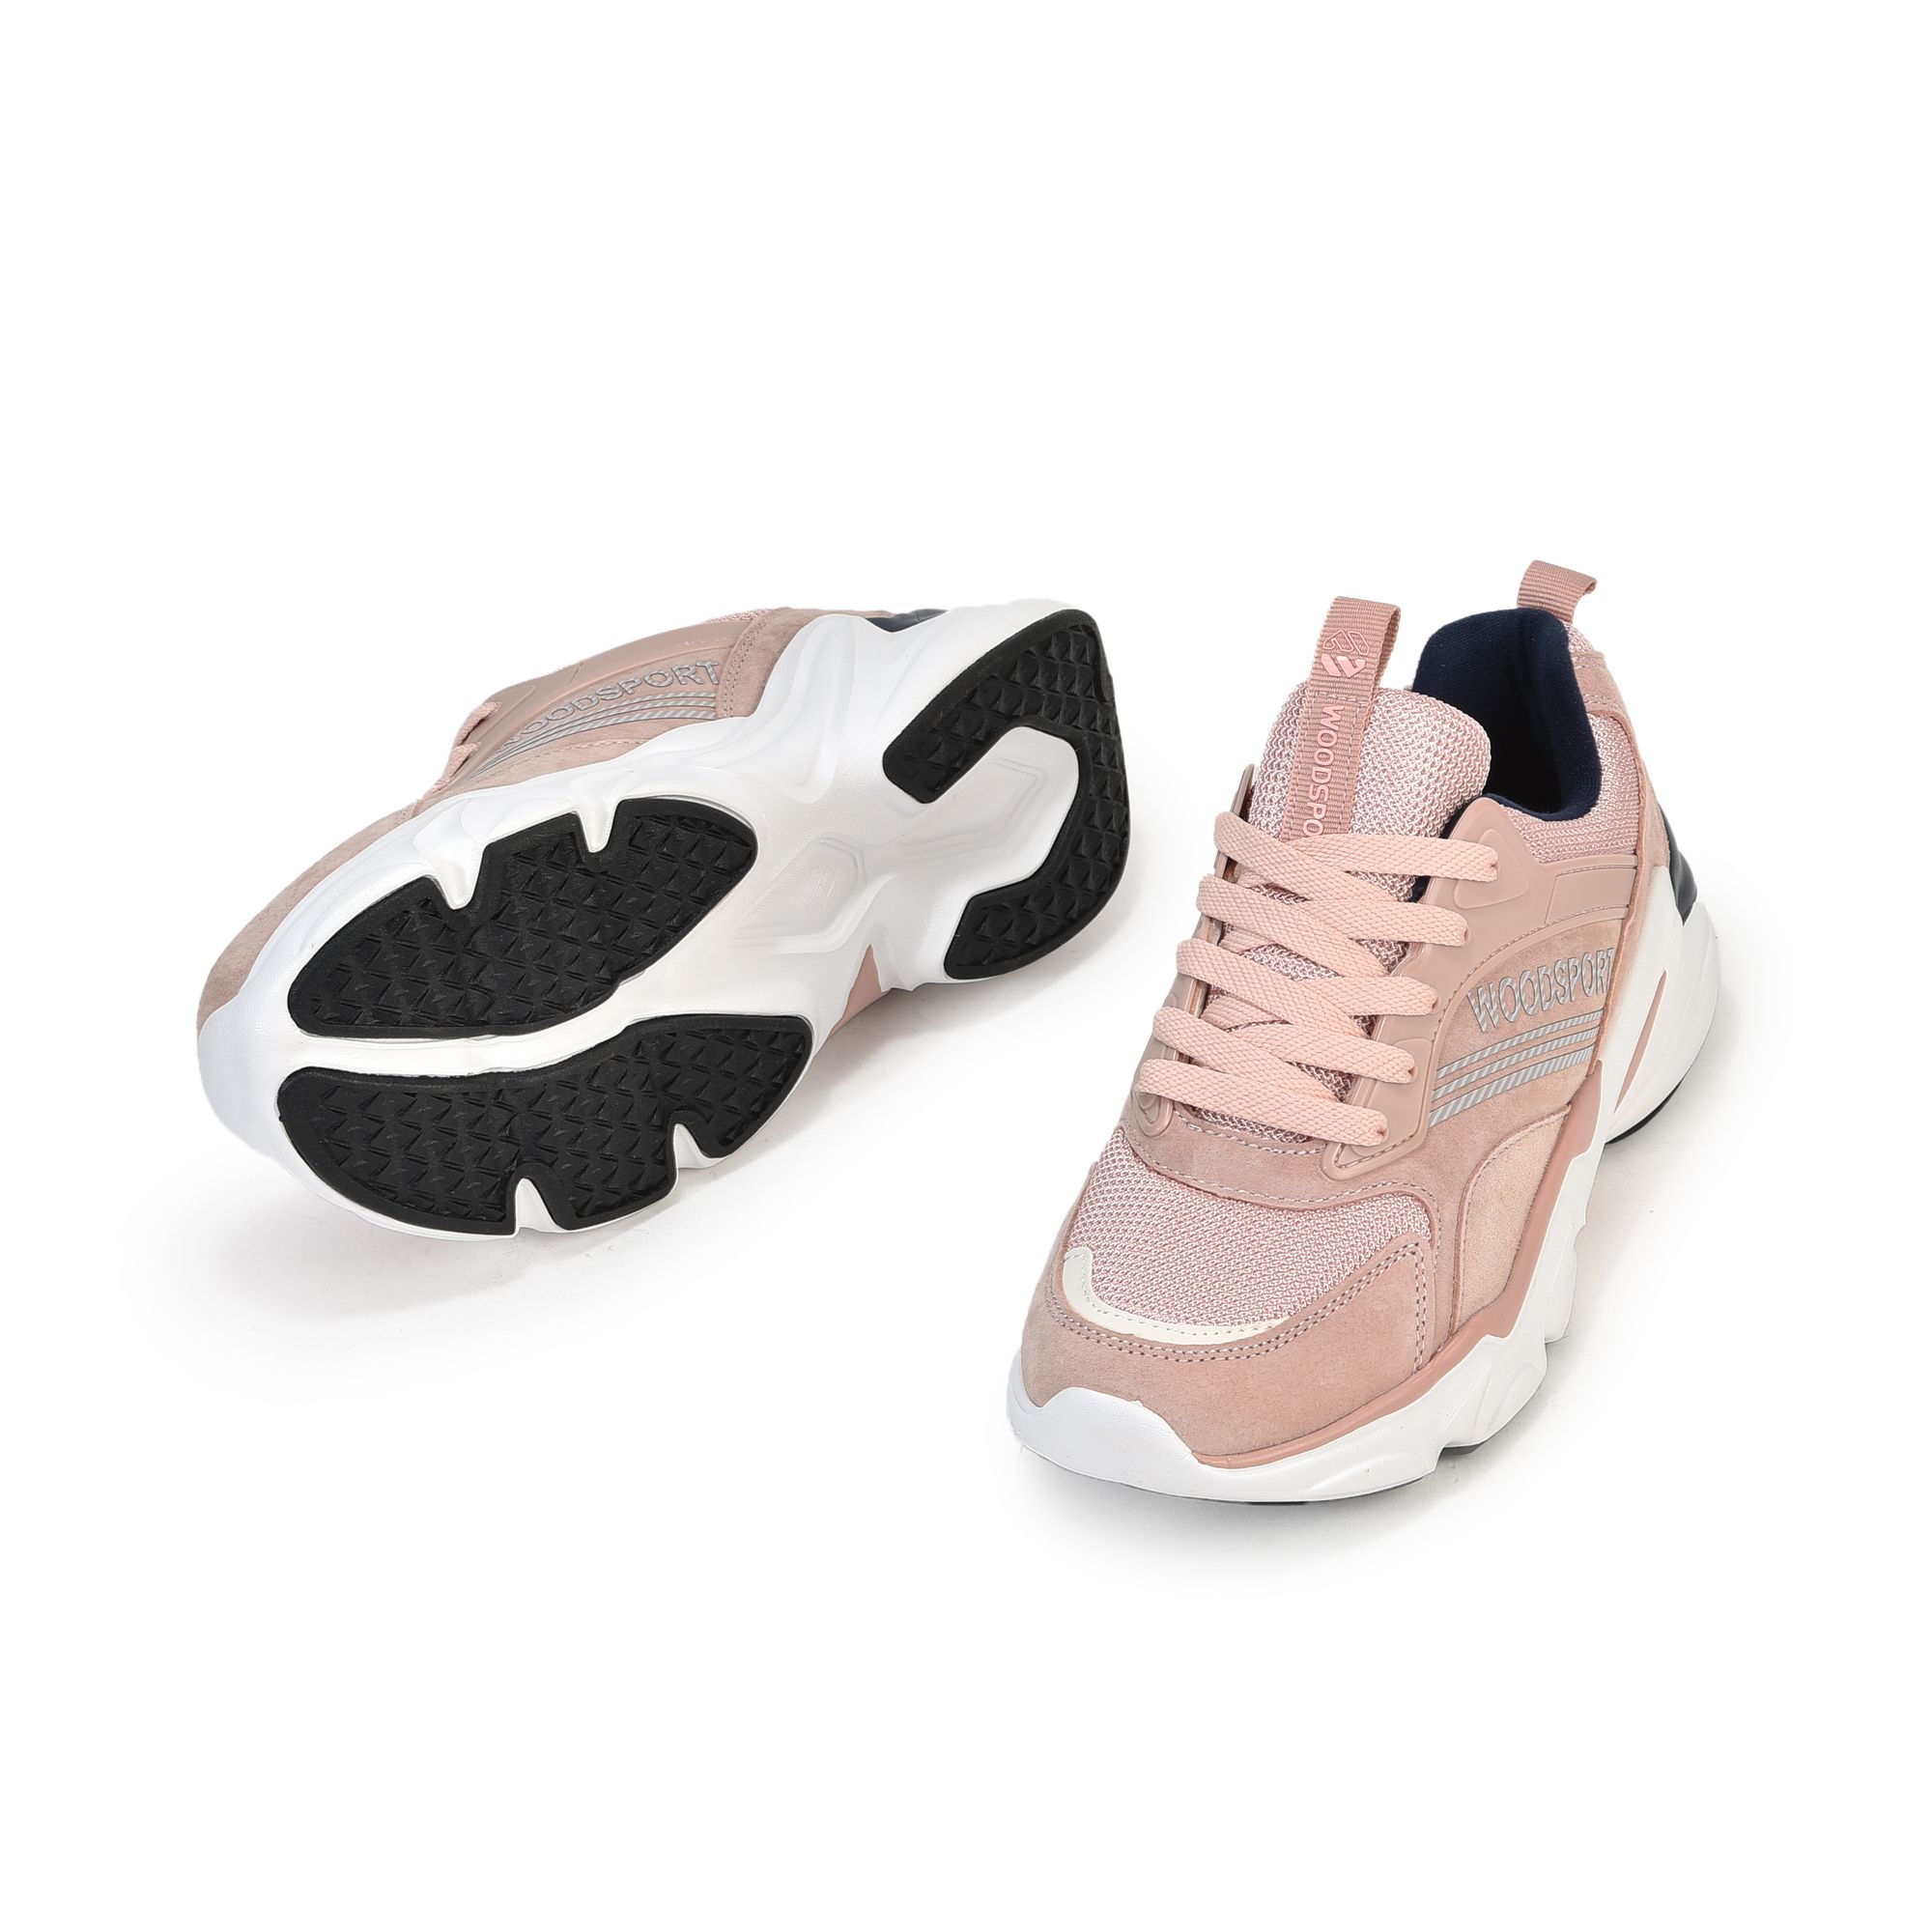 Pink sneakers for women